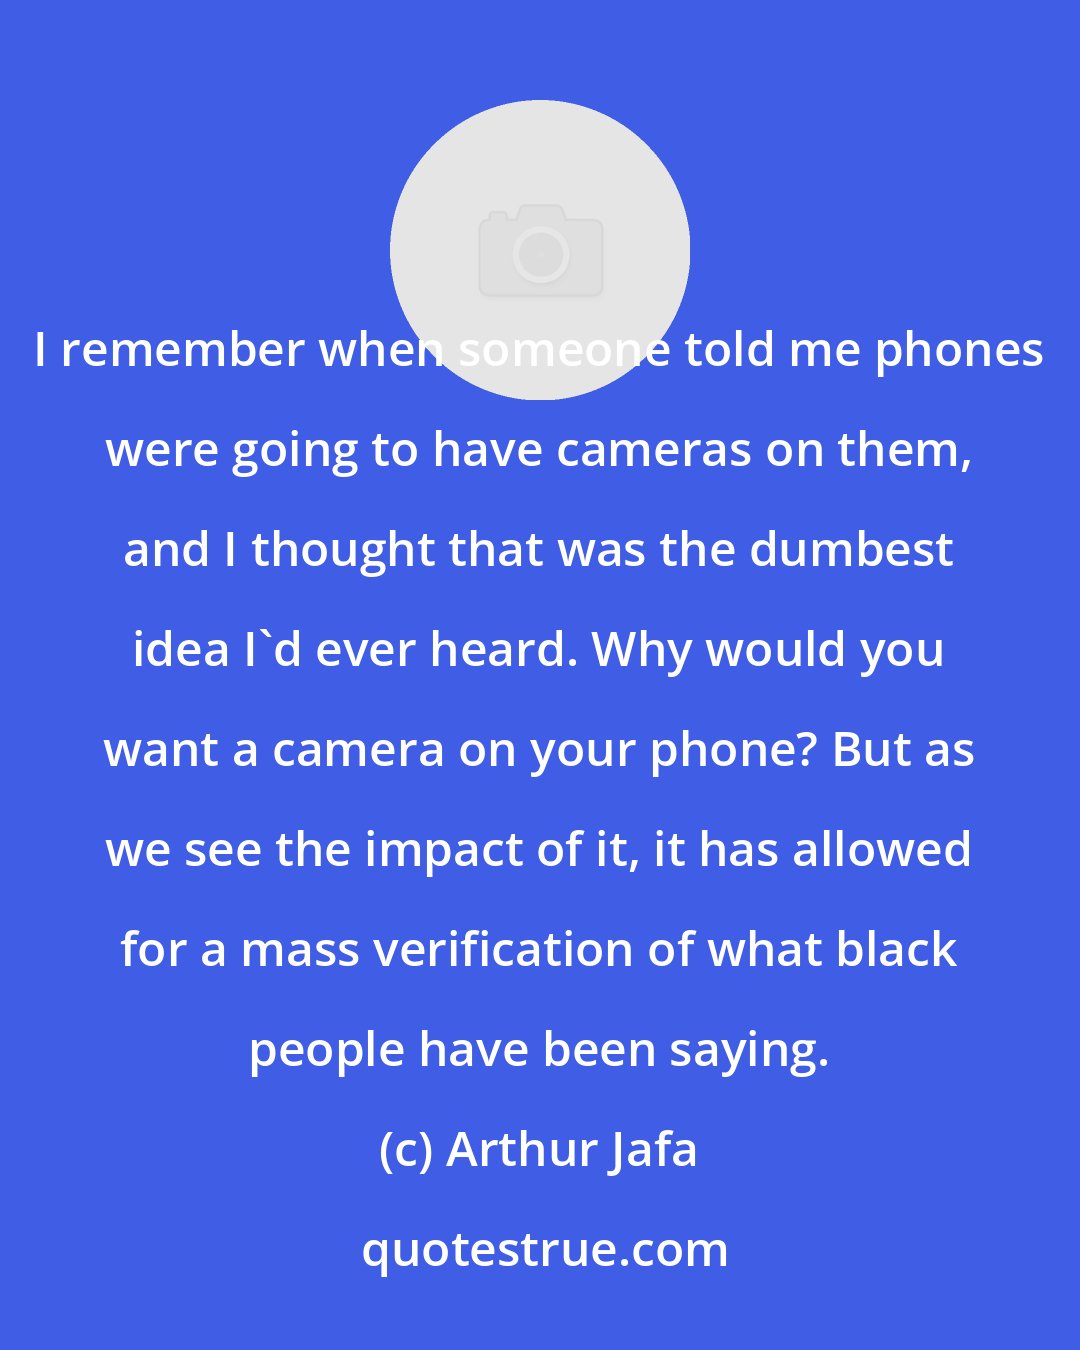 Arthur Jafa: I remember when someone told me phones were going to have cameras on them, and I thought that was the dumbest idea I'd ever heard. Why would you want a camera on your phone? But as we see the impact of it, it has allowed for a mass verification of what black people have been saying.